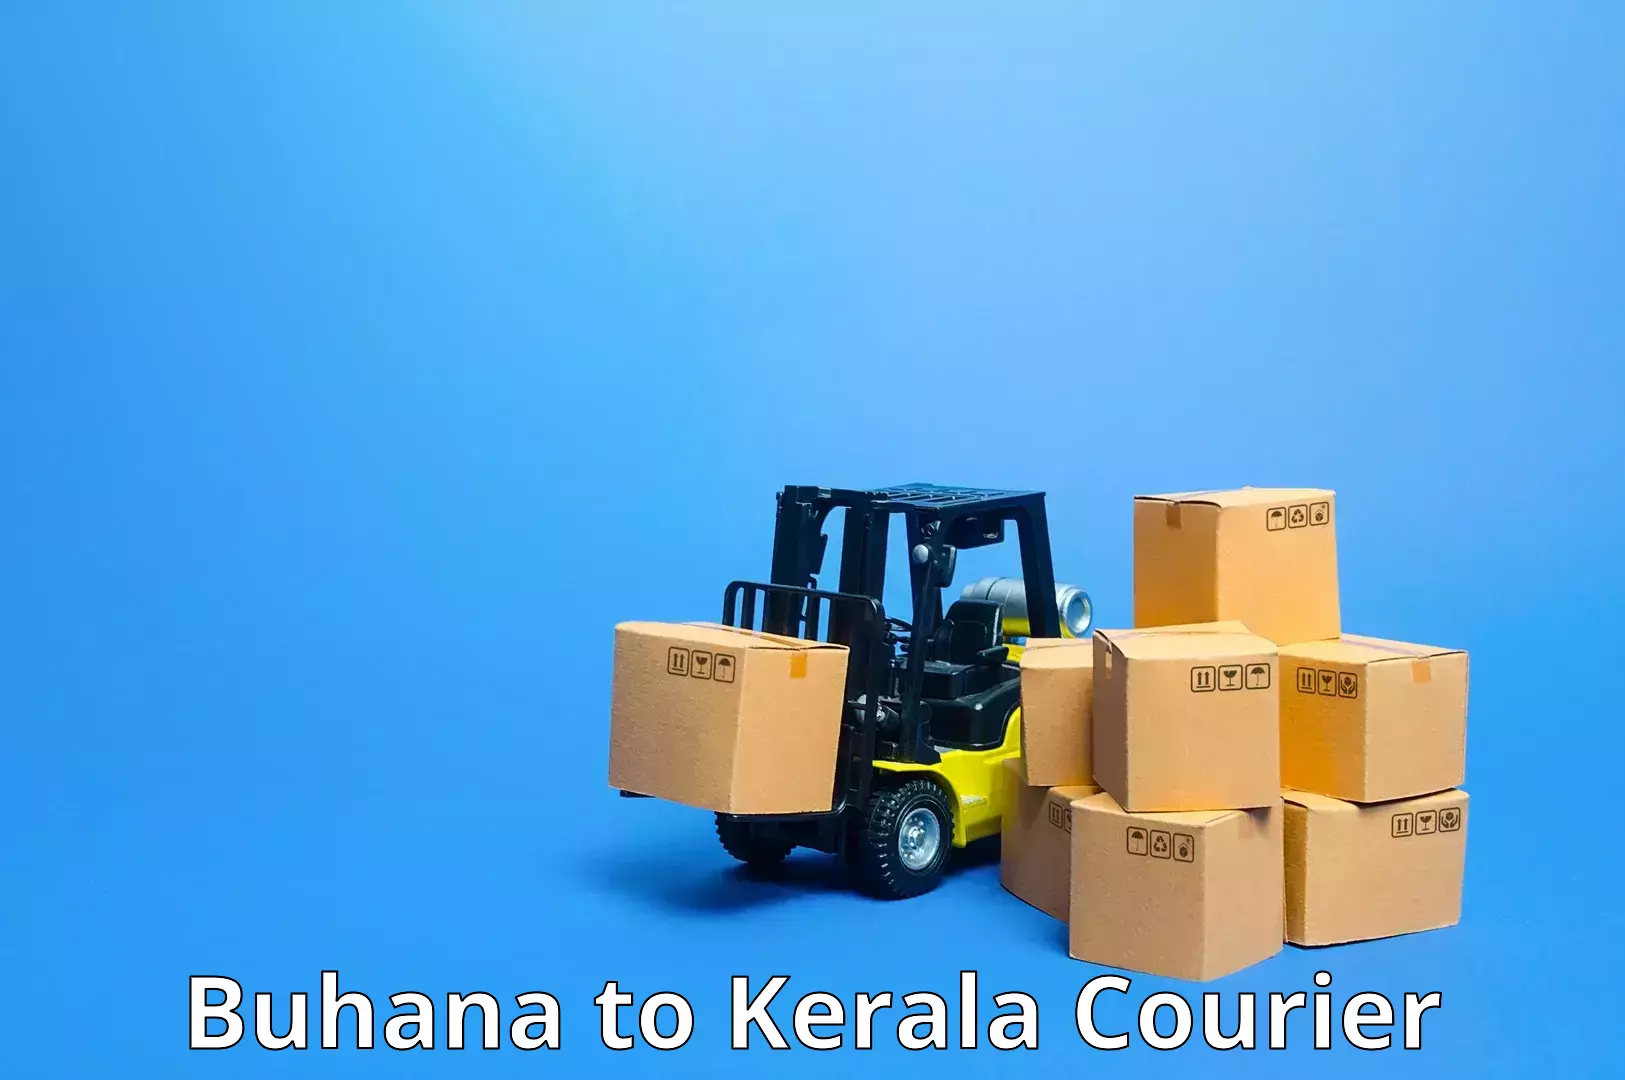 Express package handling Buhana to Balussery